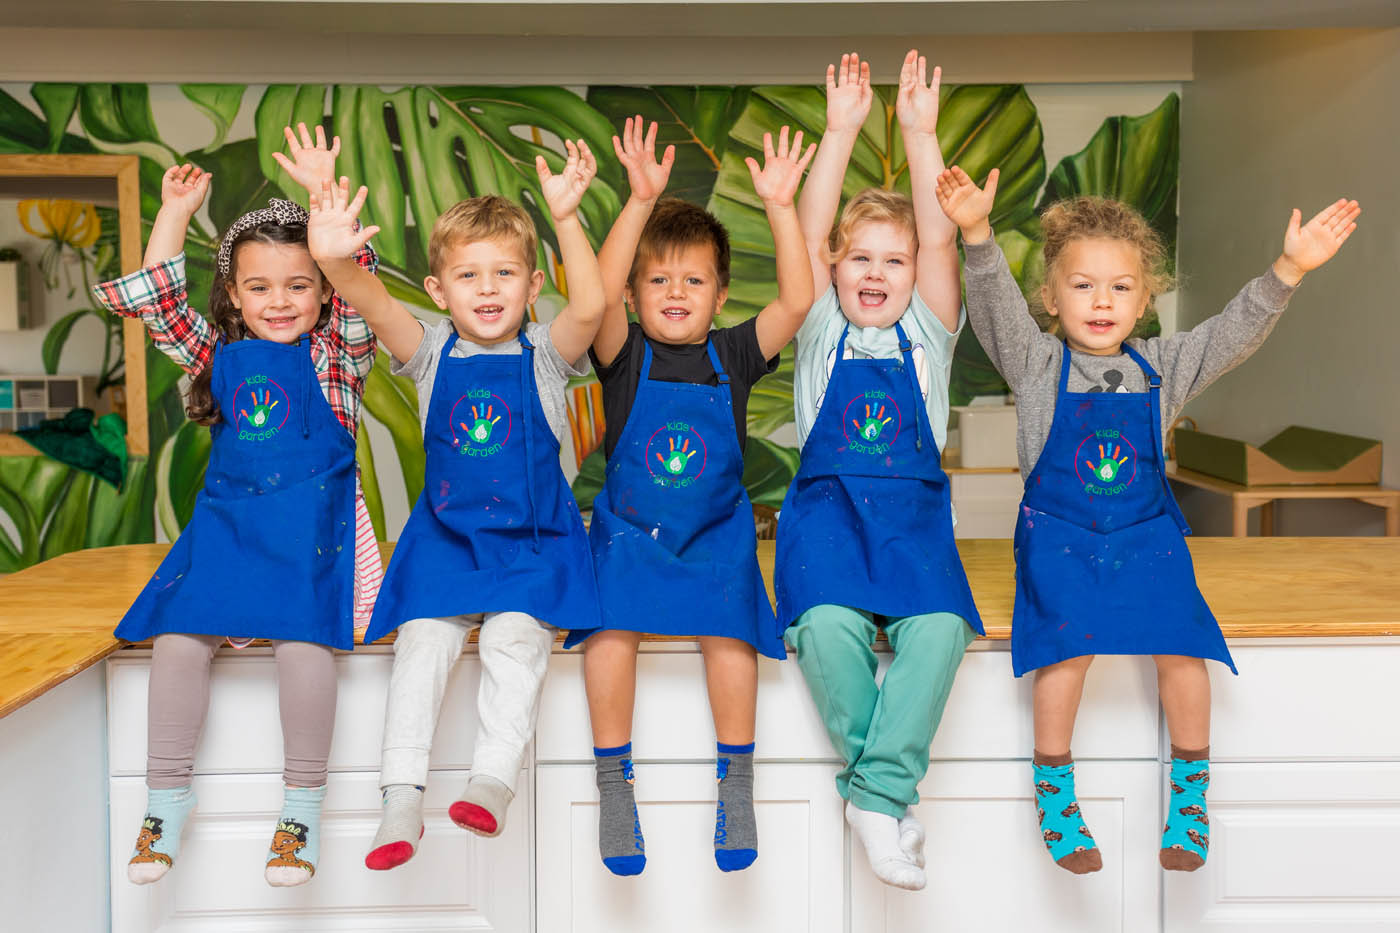 Kids in blue aprons at Kids Garden Evergreen learning center.